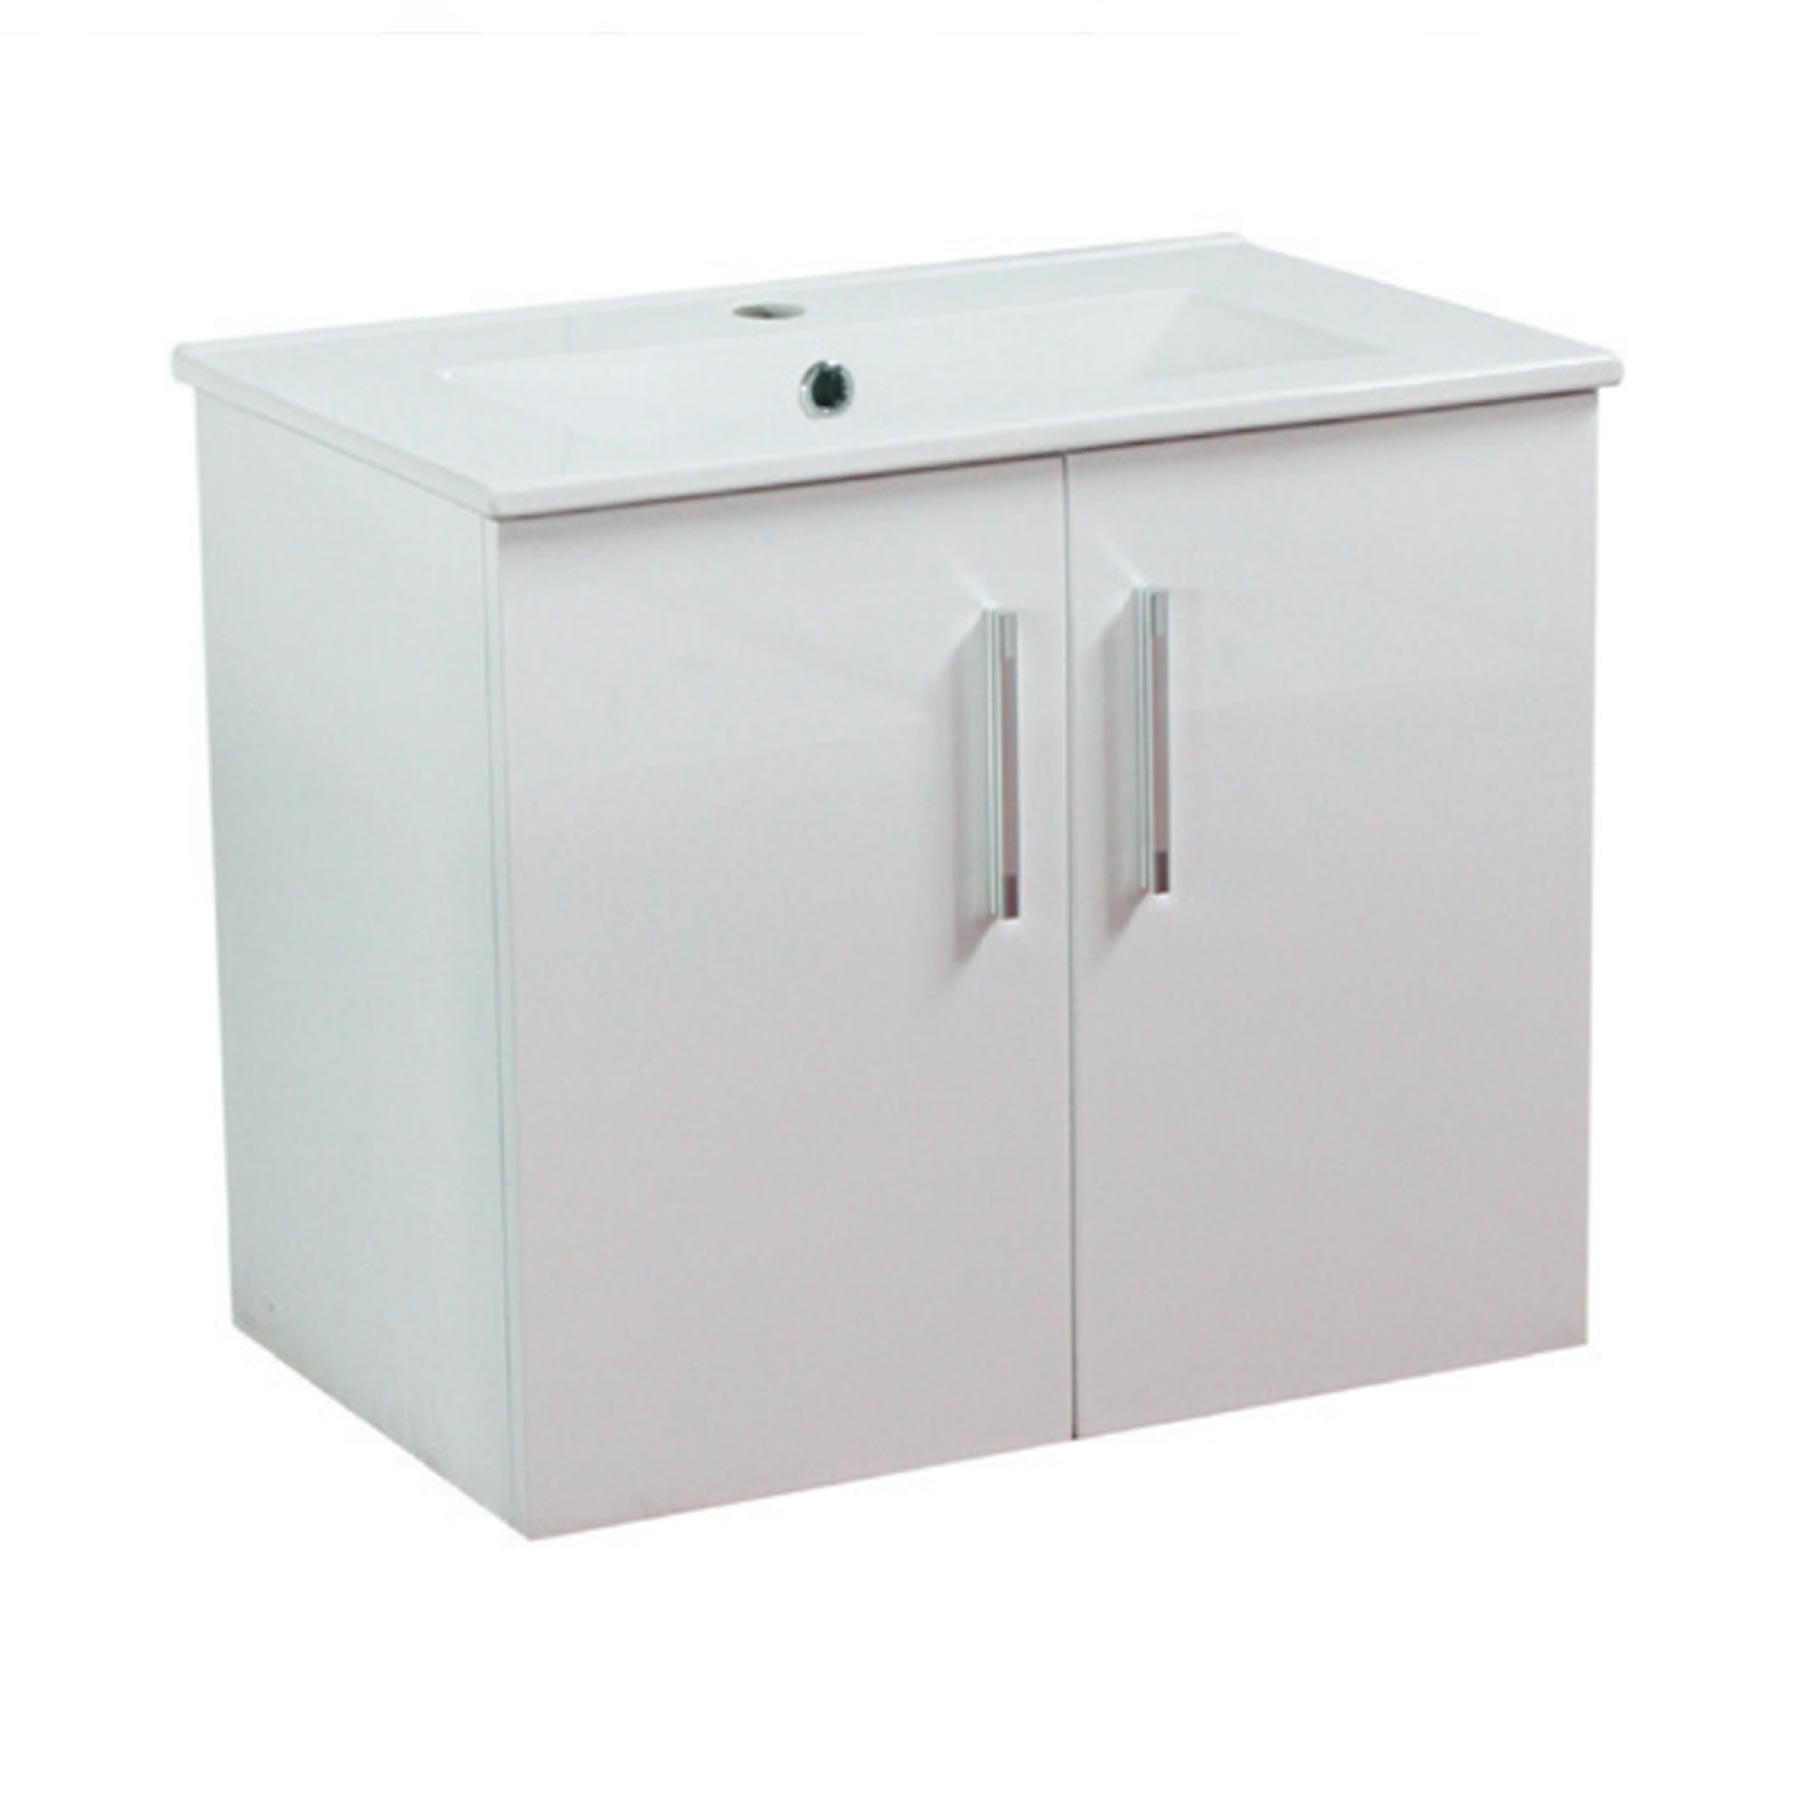 Simplistic Flair Wall Hung Vanity Unit with Glossy White finish and Chrome Handles